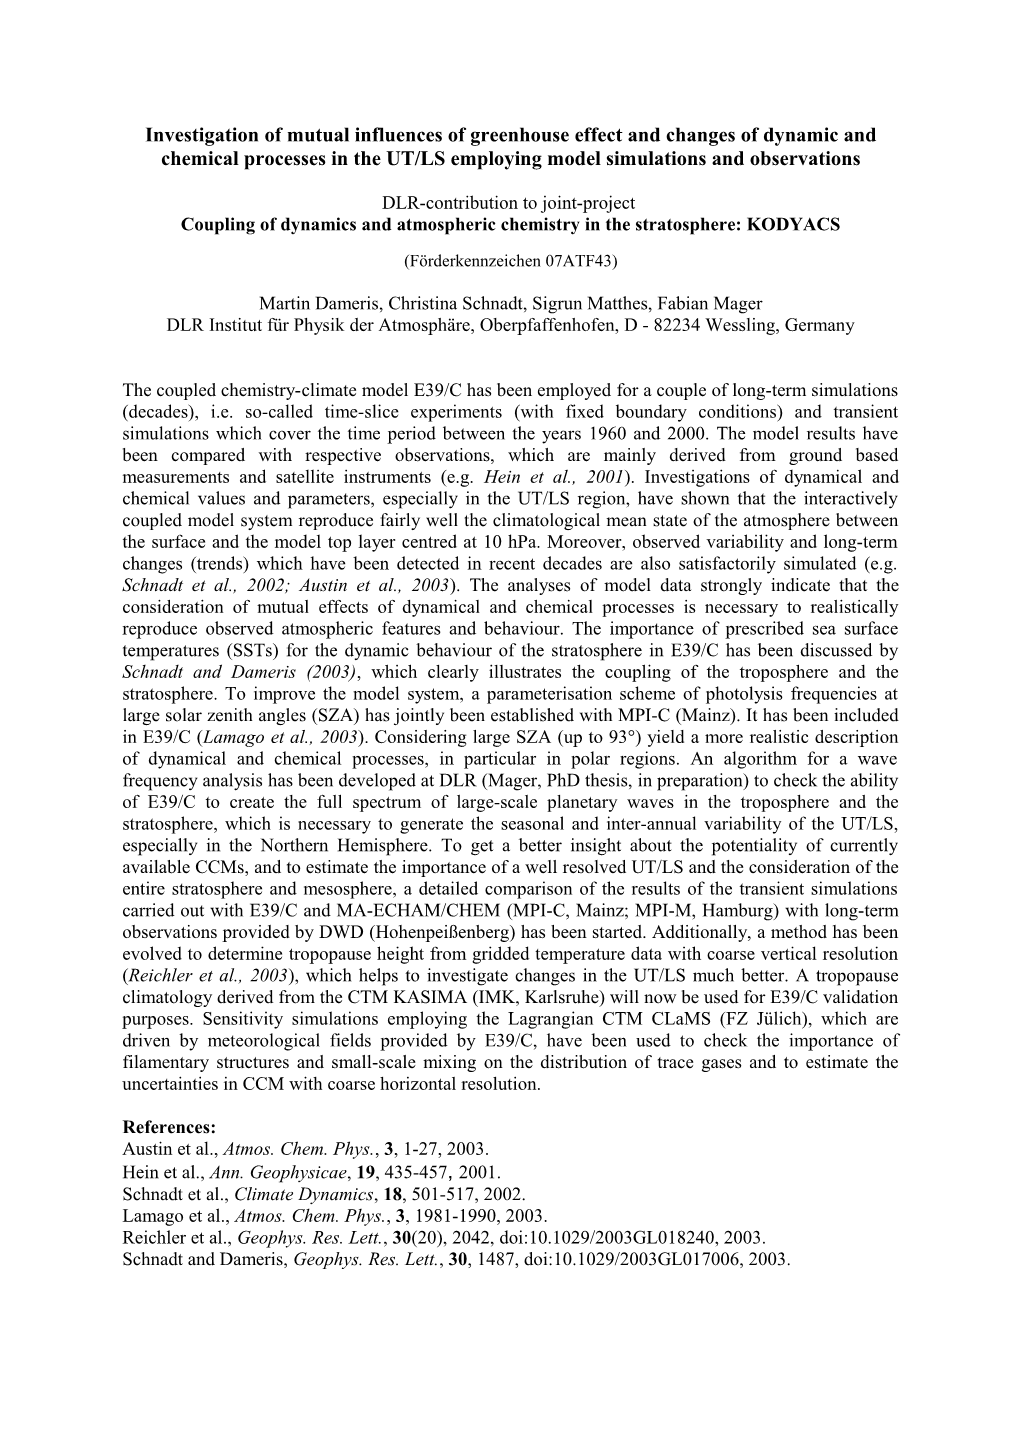 Coupling of Dynamics and Atmospheric Chemistry in the Stratosphere: KODYACS